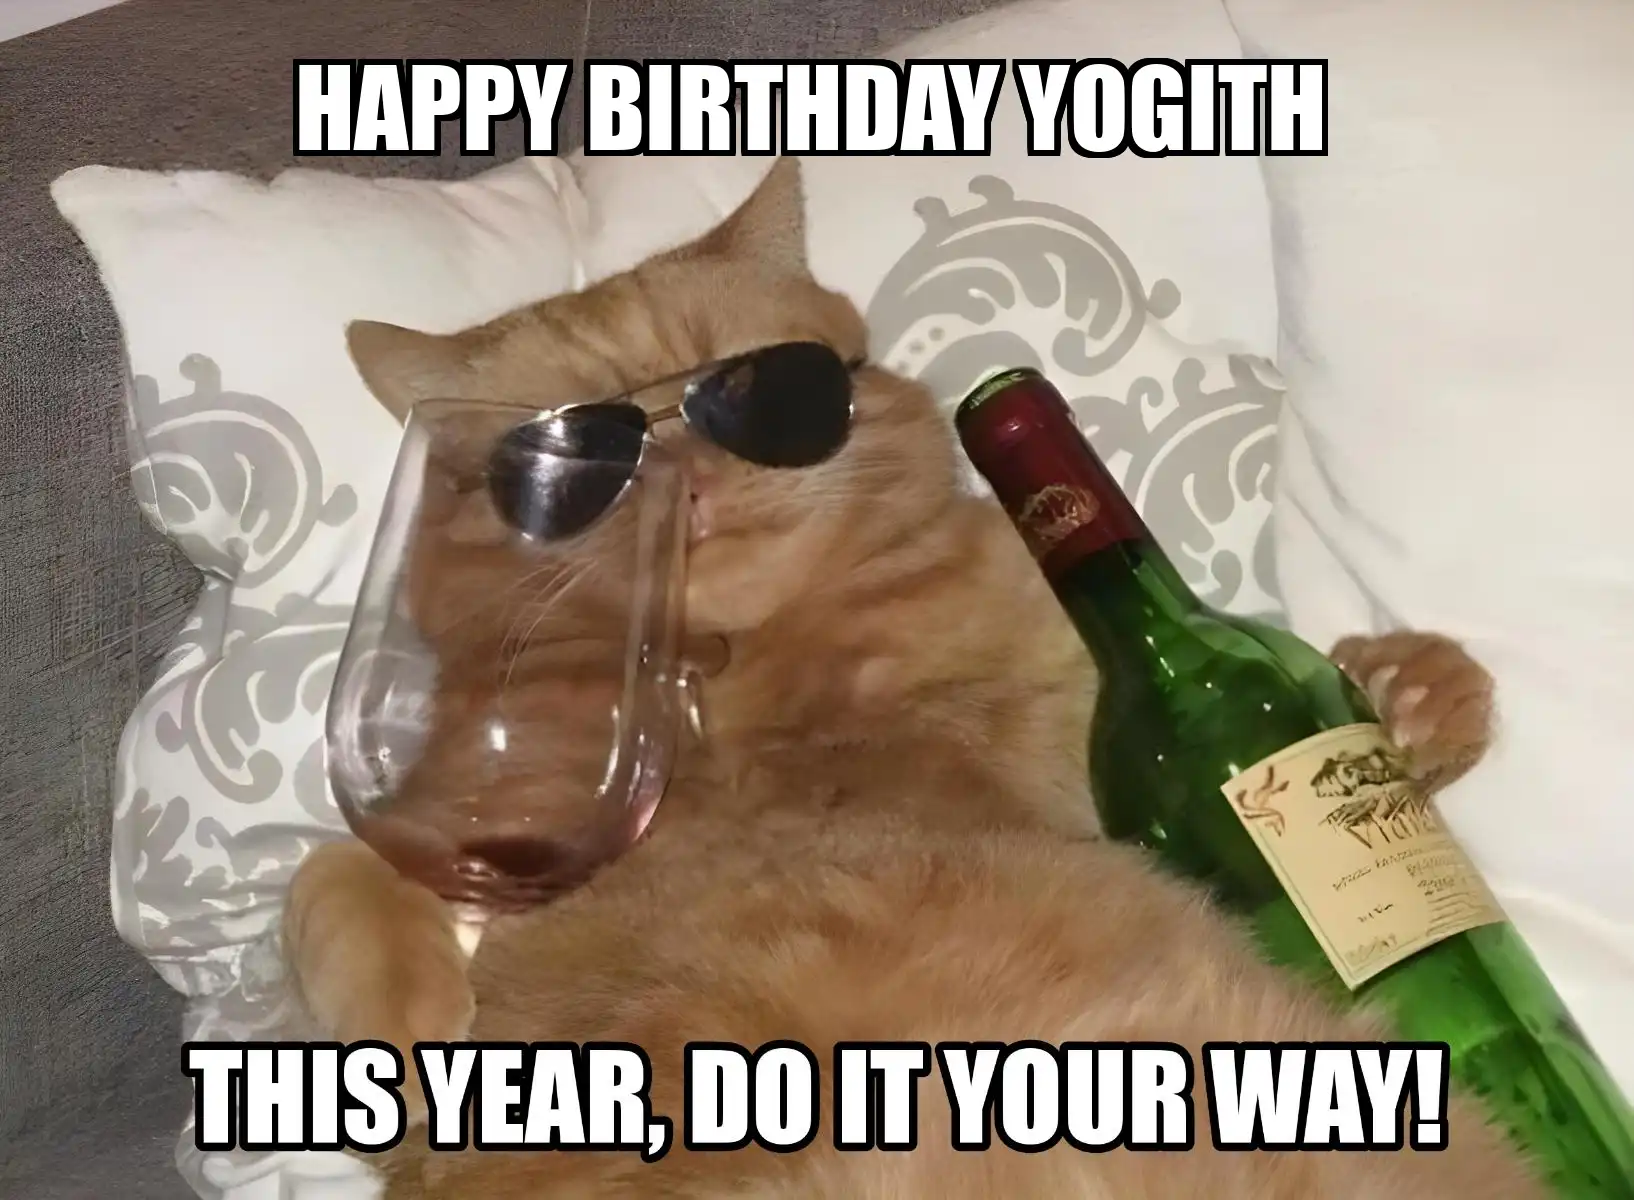 Happy Birthday Yogith This Year Do It Your Way Meme